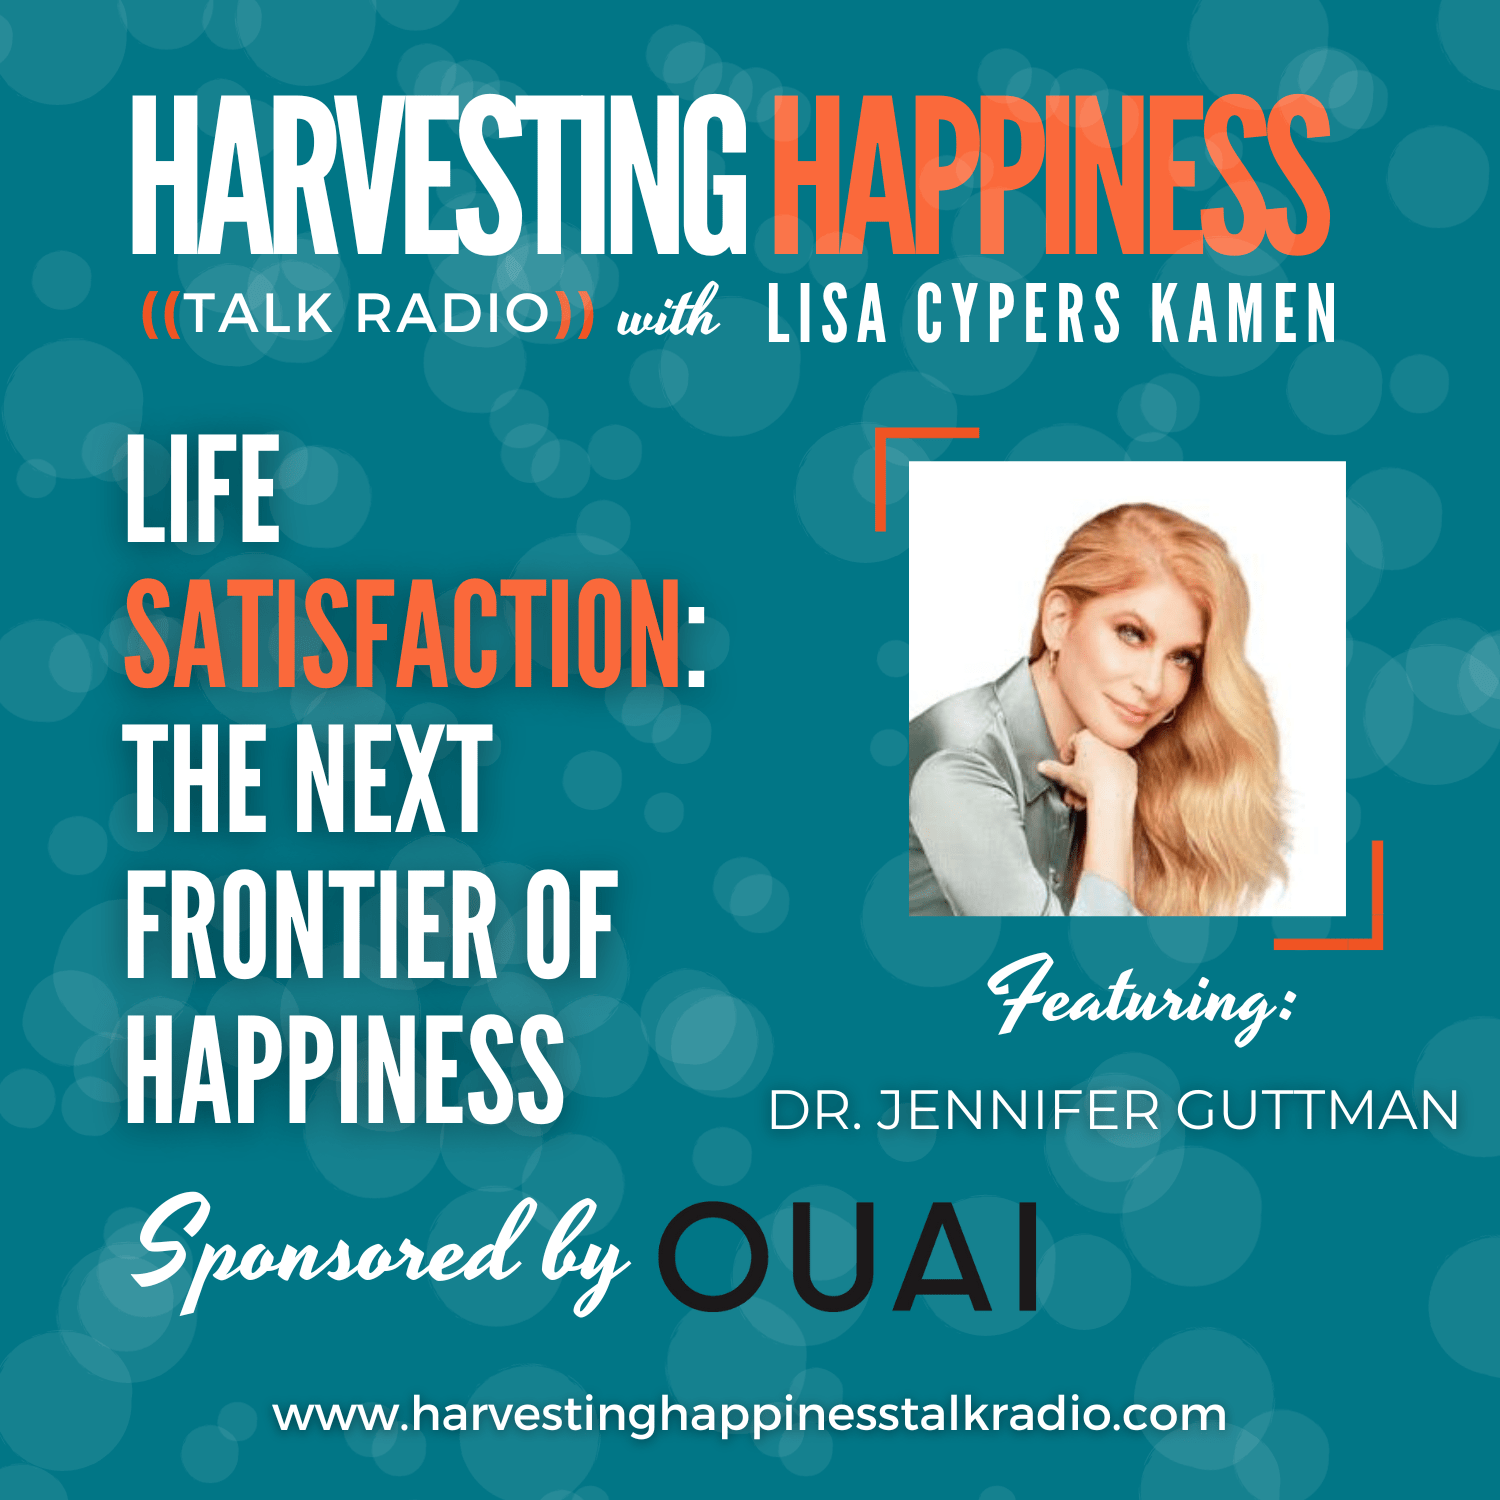 podcast episode about a life satisfaction and the next frontier of happiness with Jennifer Guttman